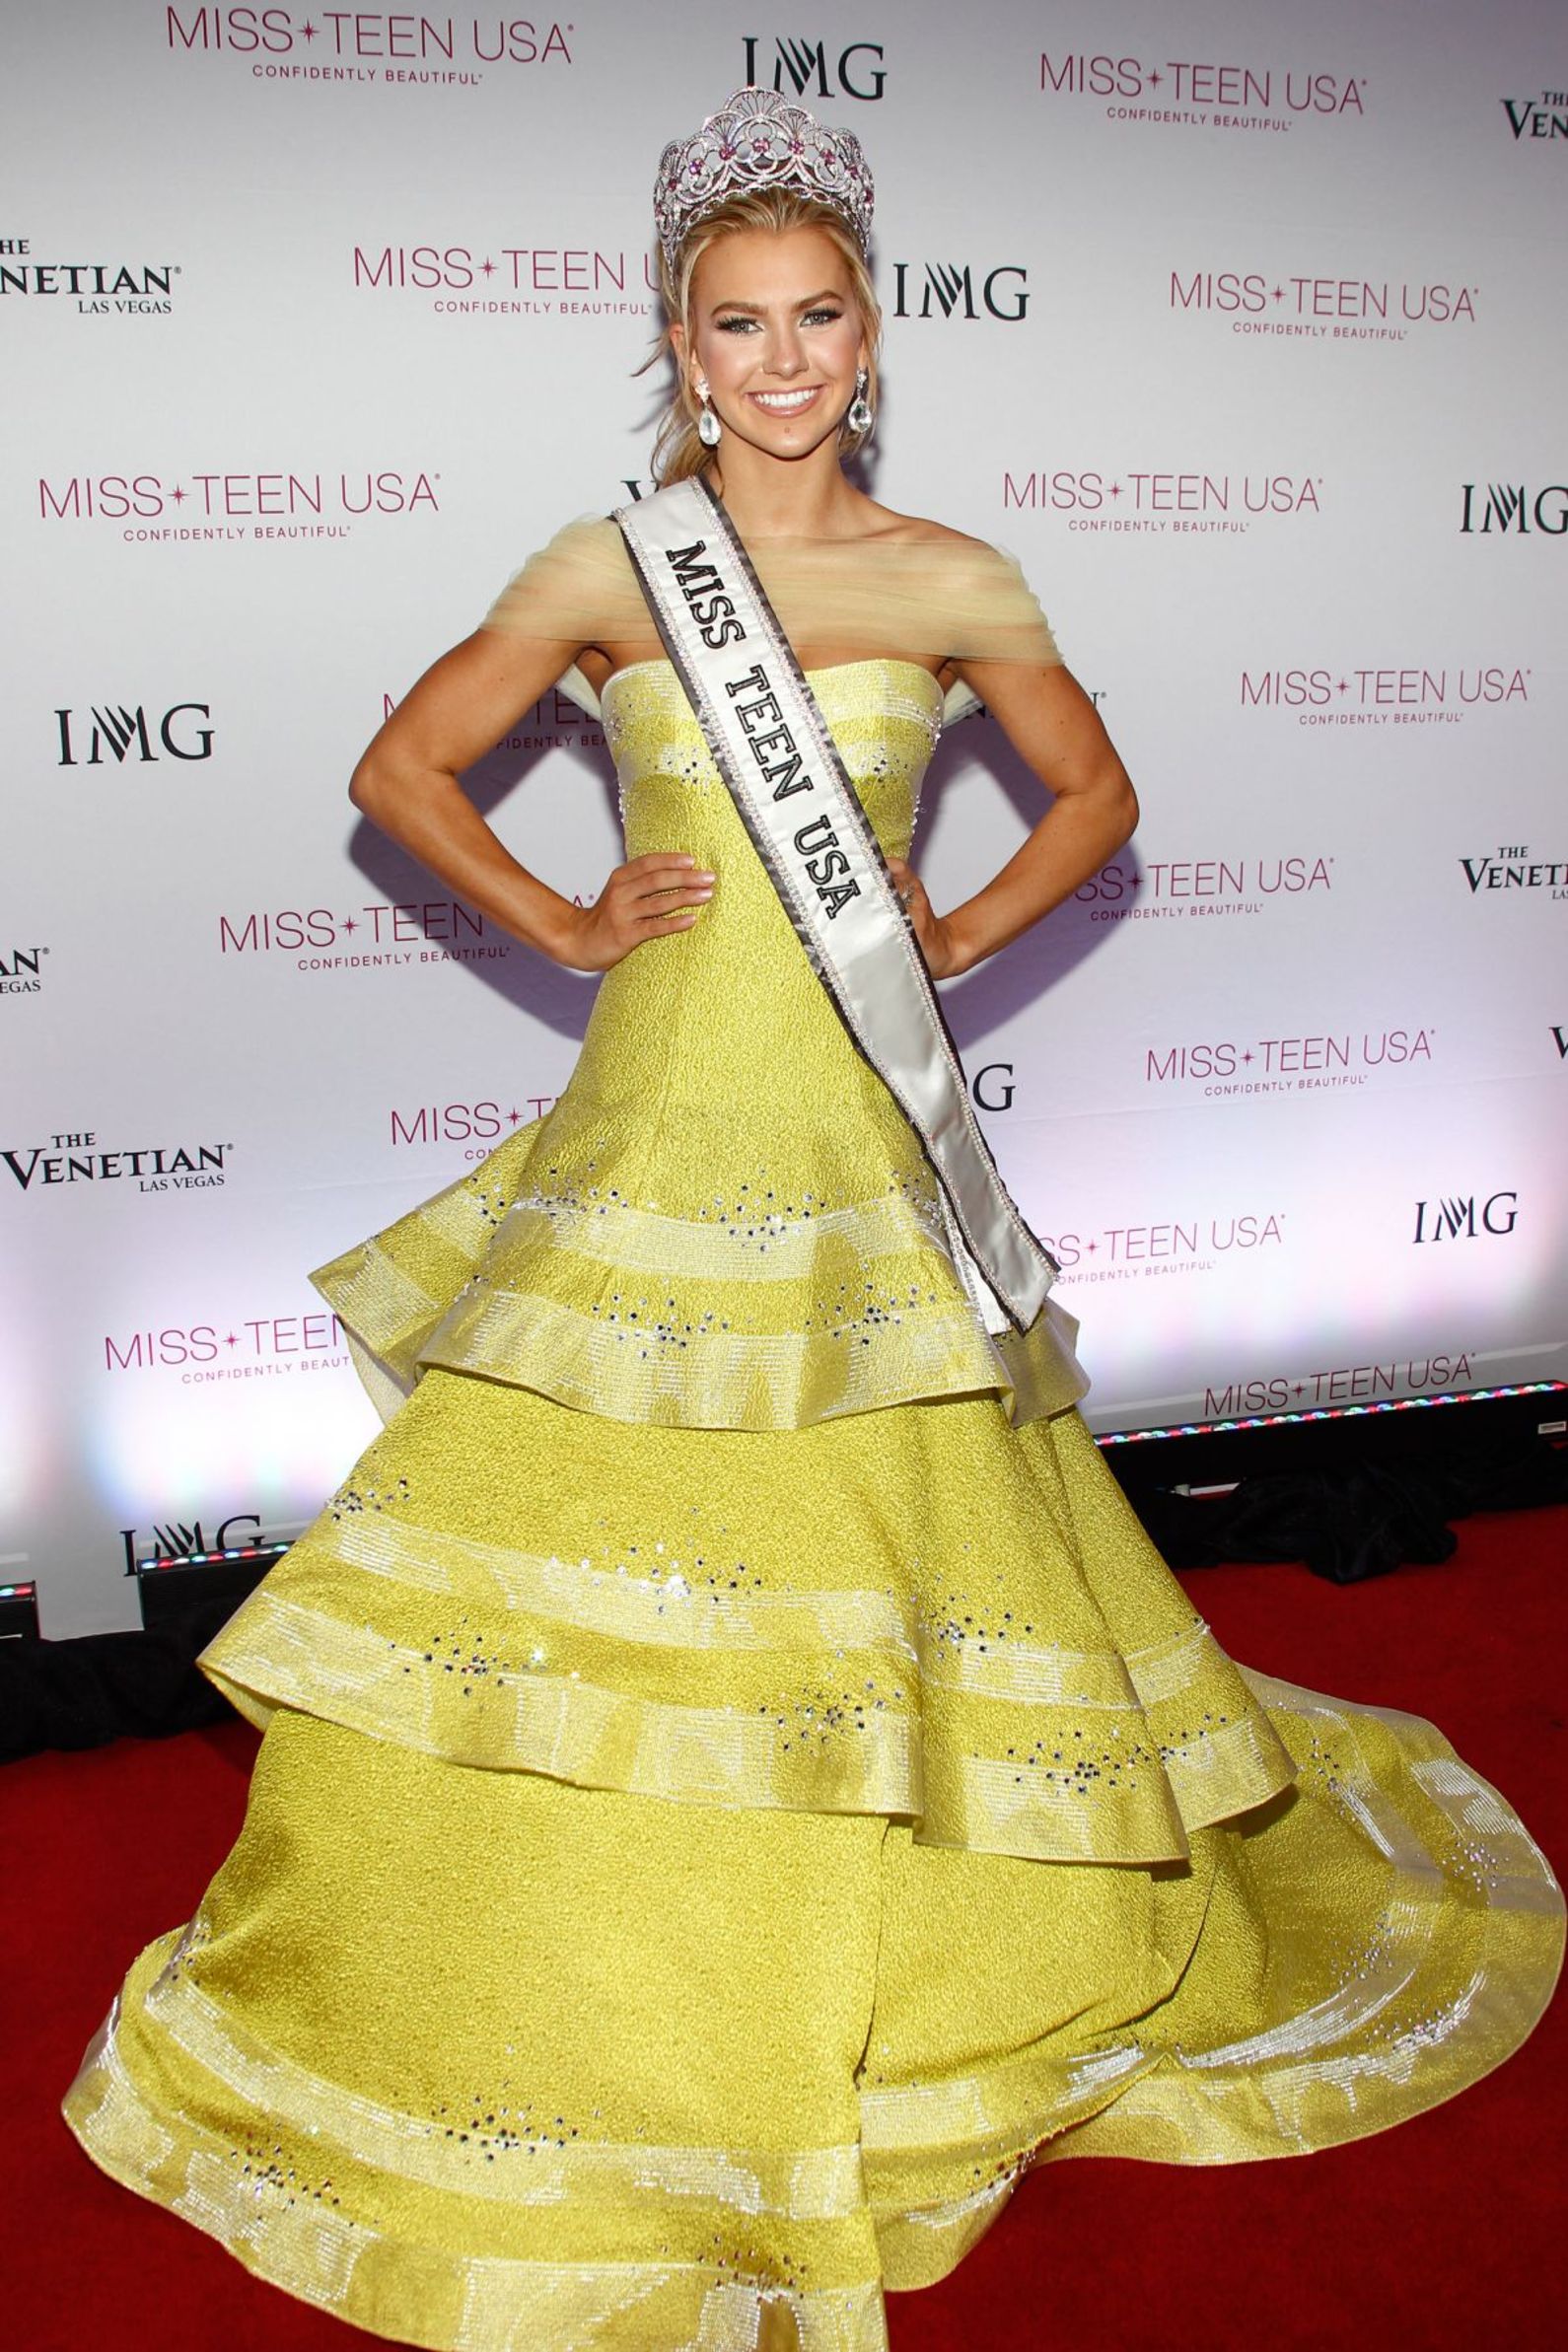 miss-teen-usa-2016-karlie-hay-at-2016-miss-teen-usa-competition-in-las-vegas-04